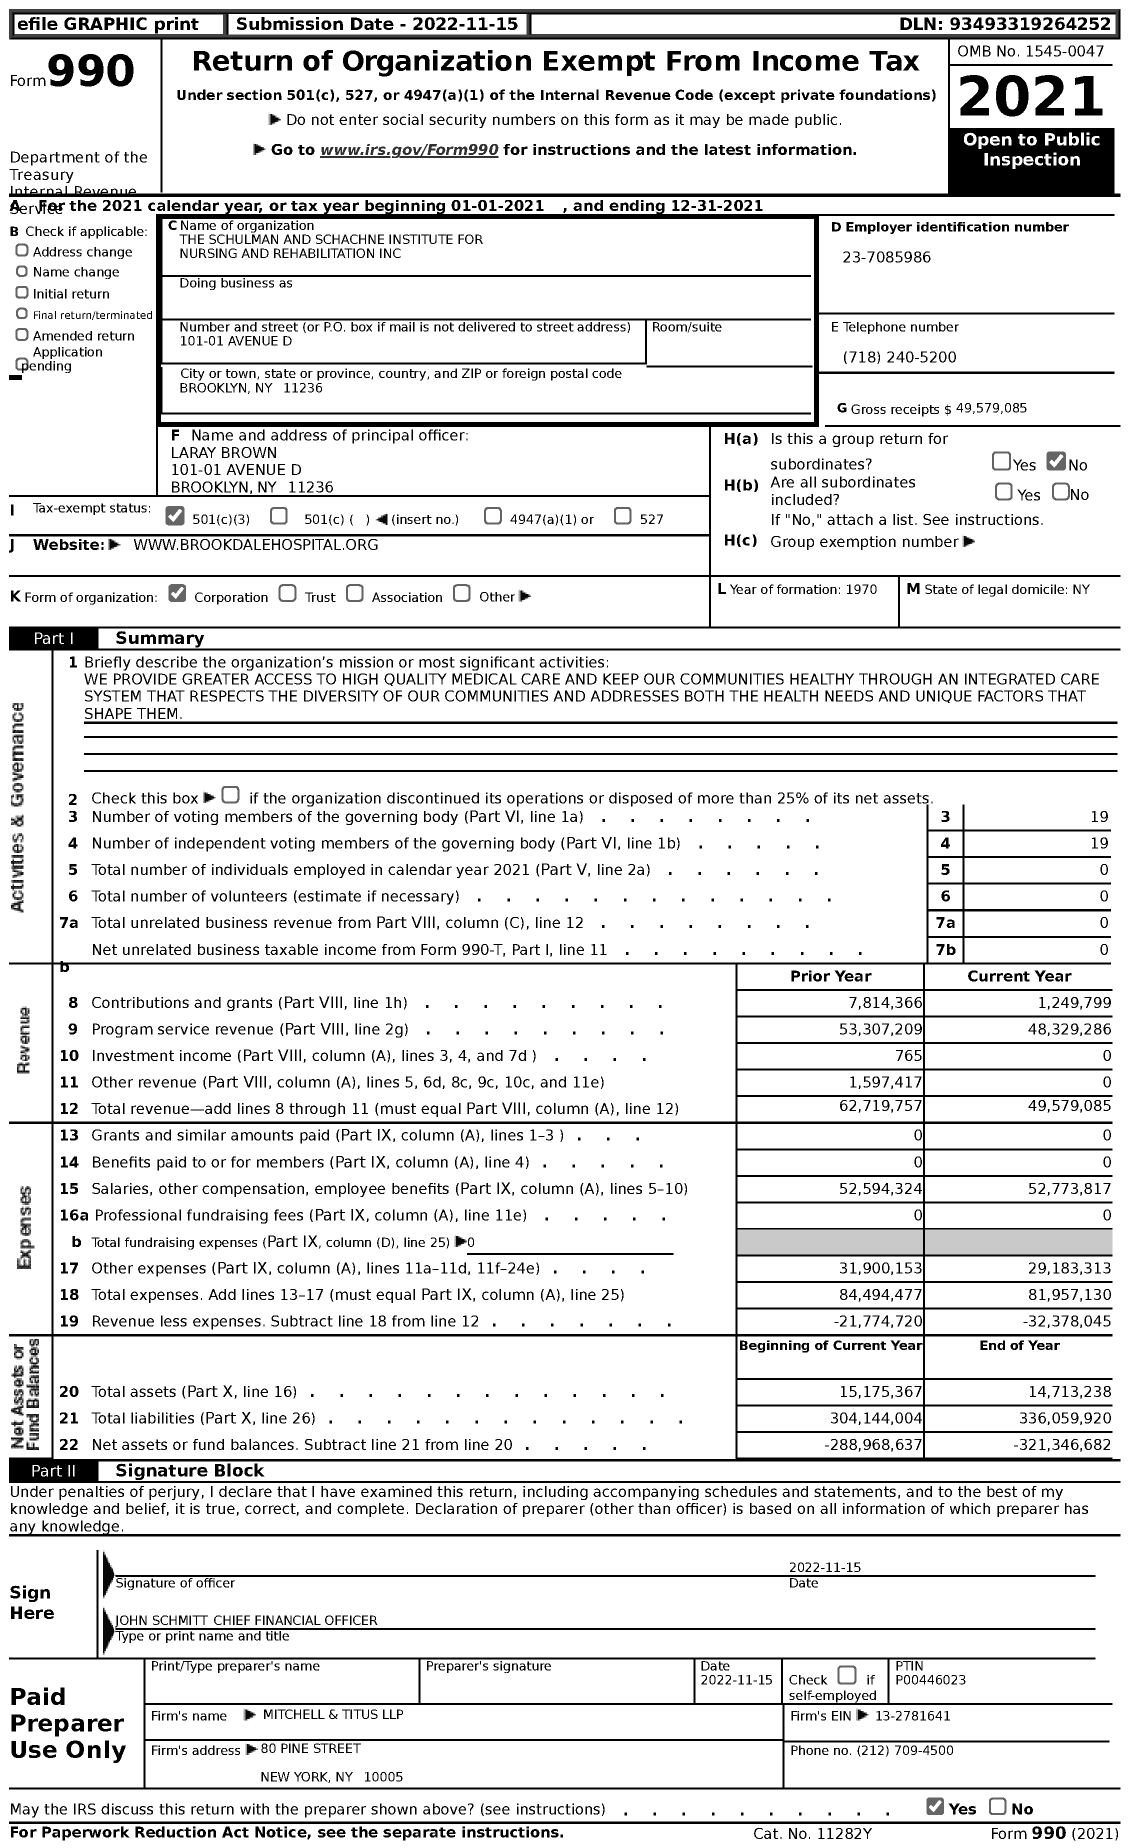 Image of first page of 2021 Form 990 for The Schulman and Schachne Institute for Nursing and Rehabilitation